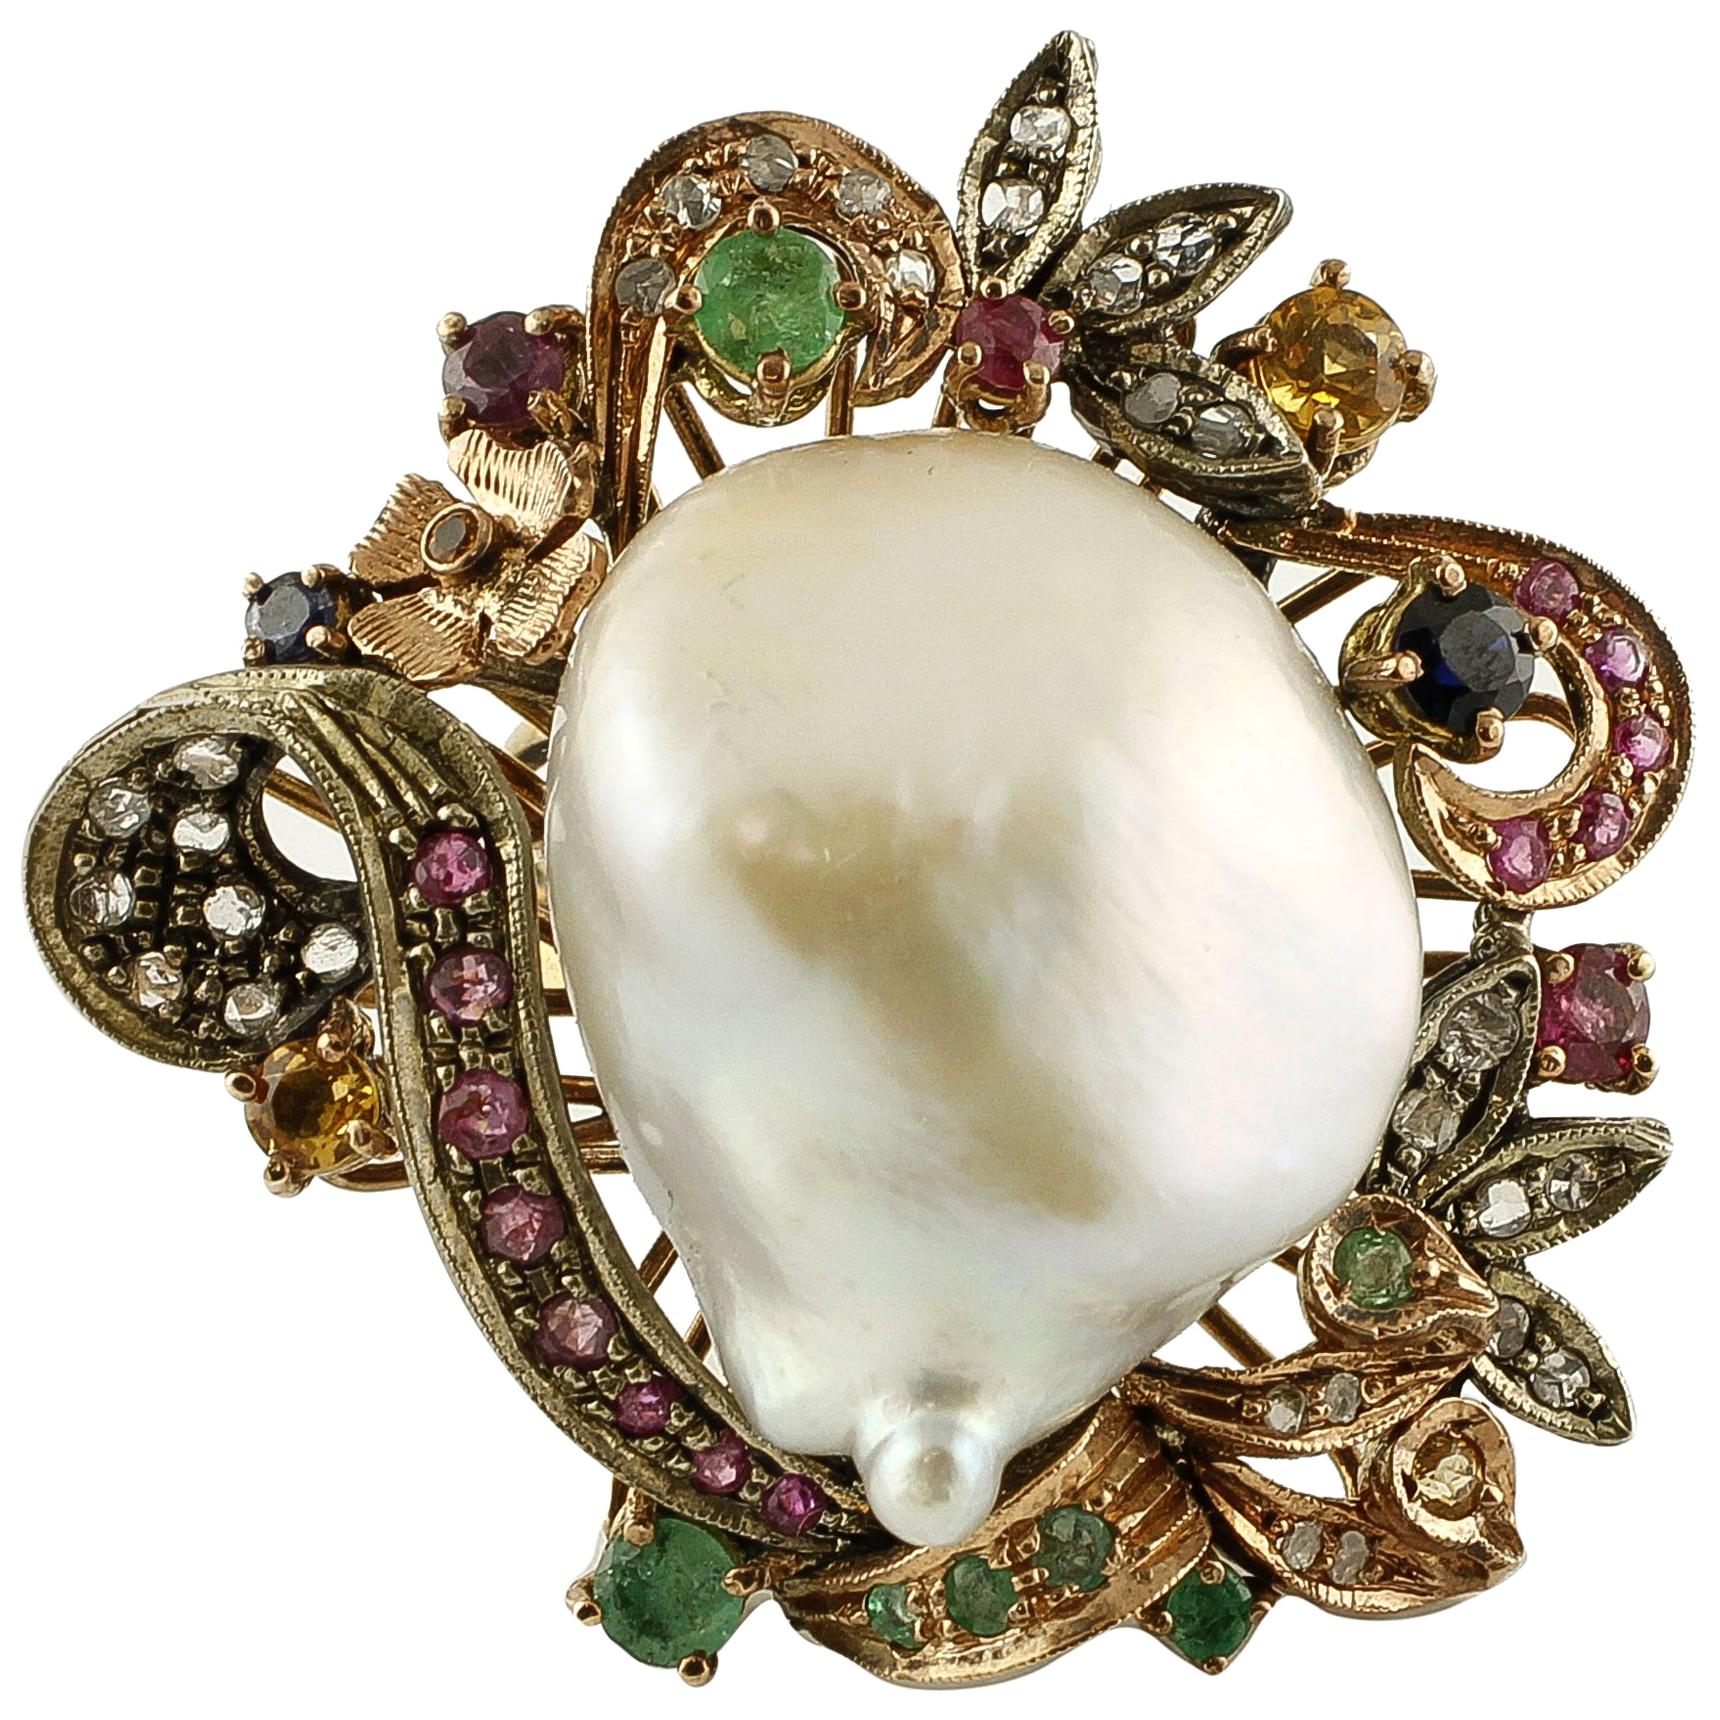 Baroque Pearl, Emeralds, Rubies, Sapphires, 9 Karat Gold and Silver Retro Ring